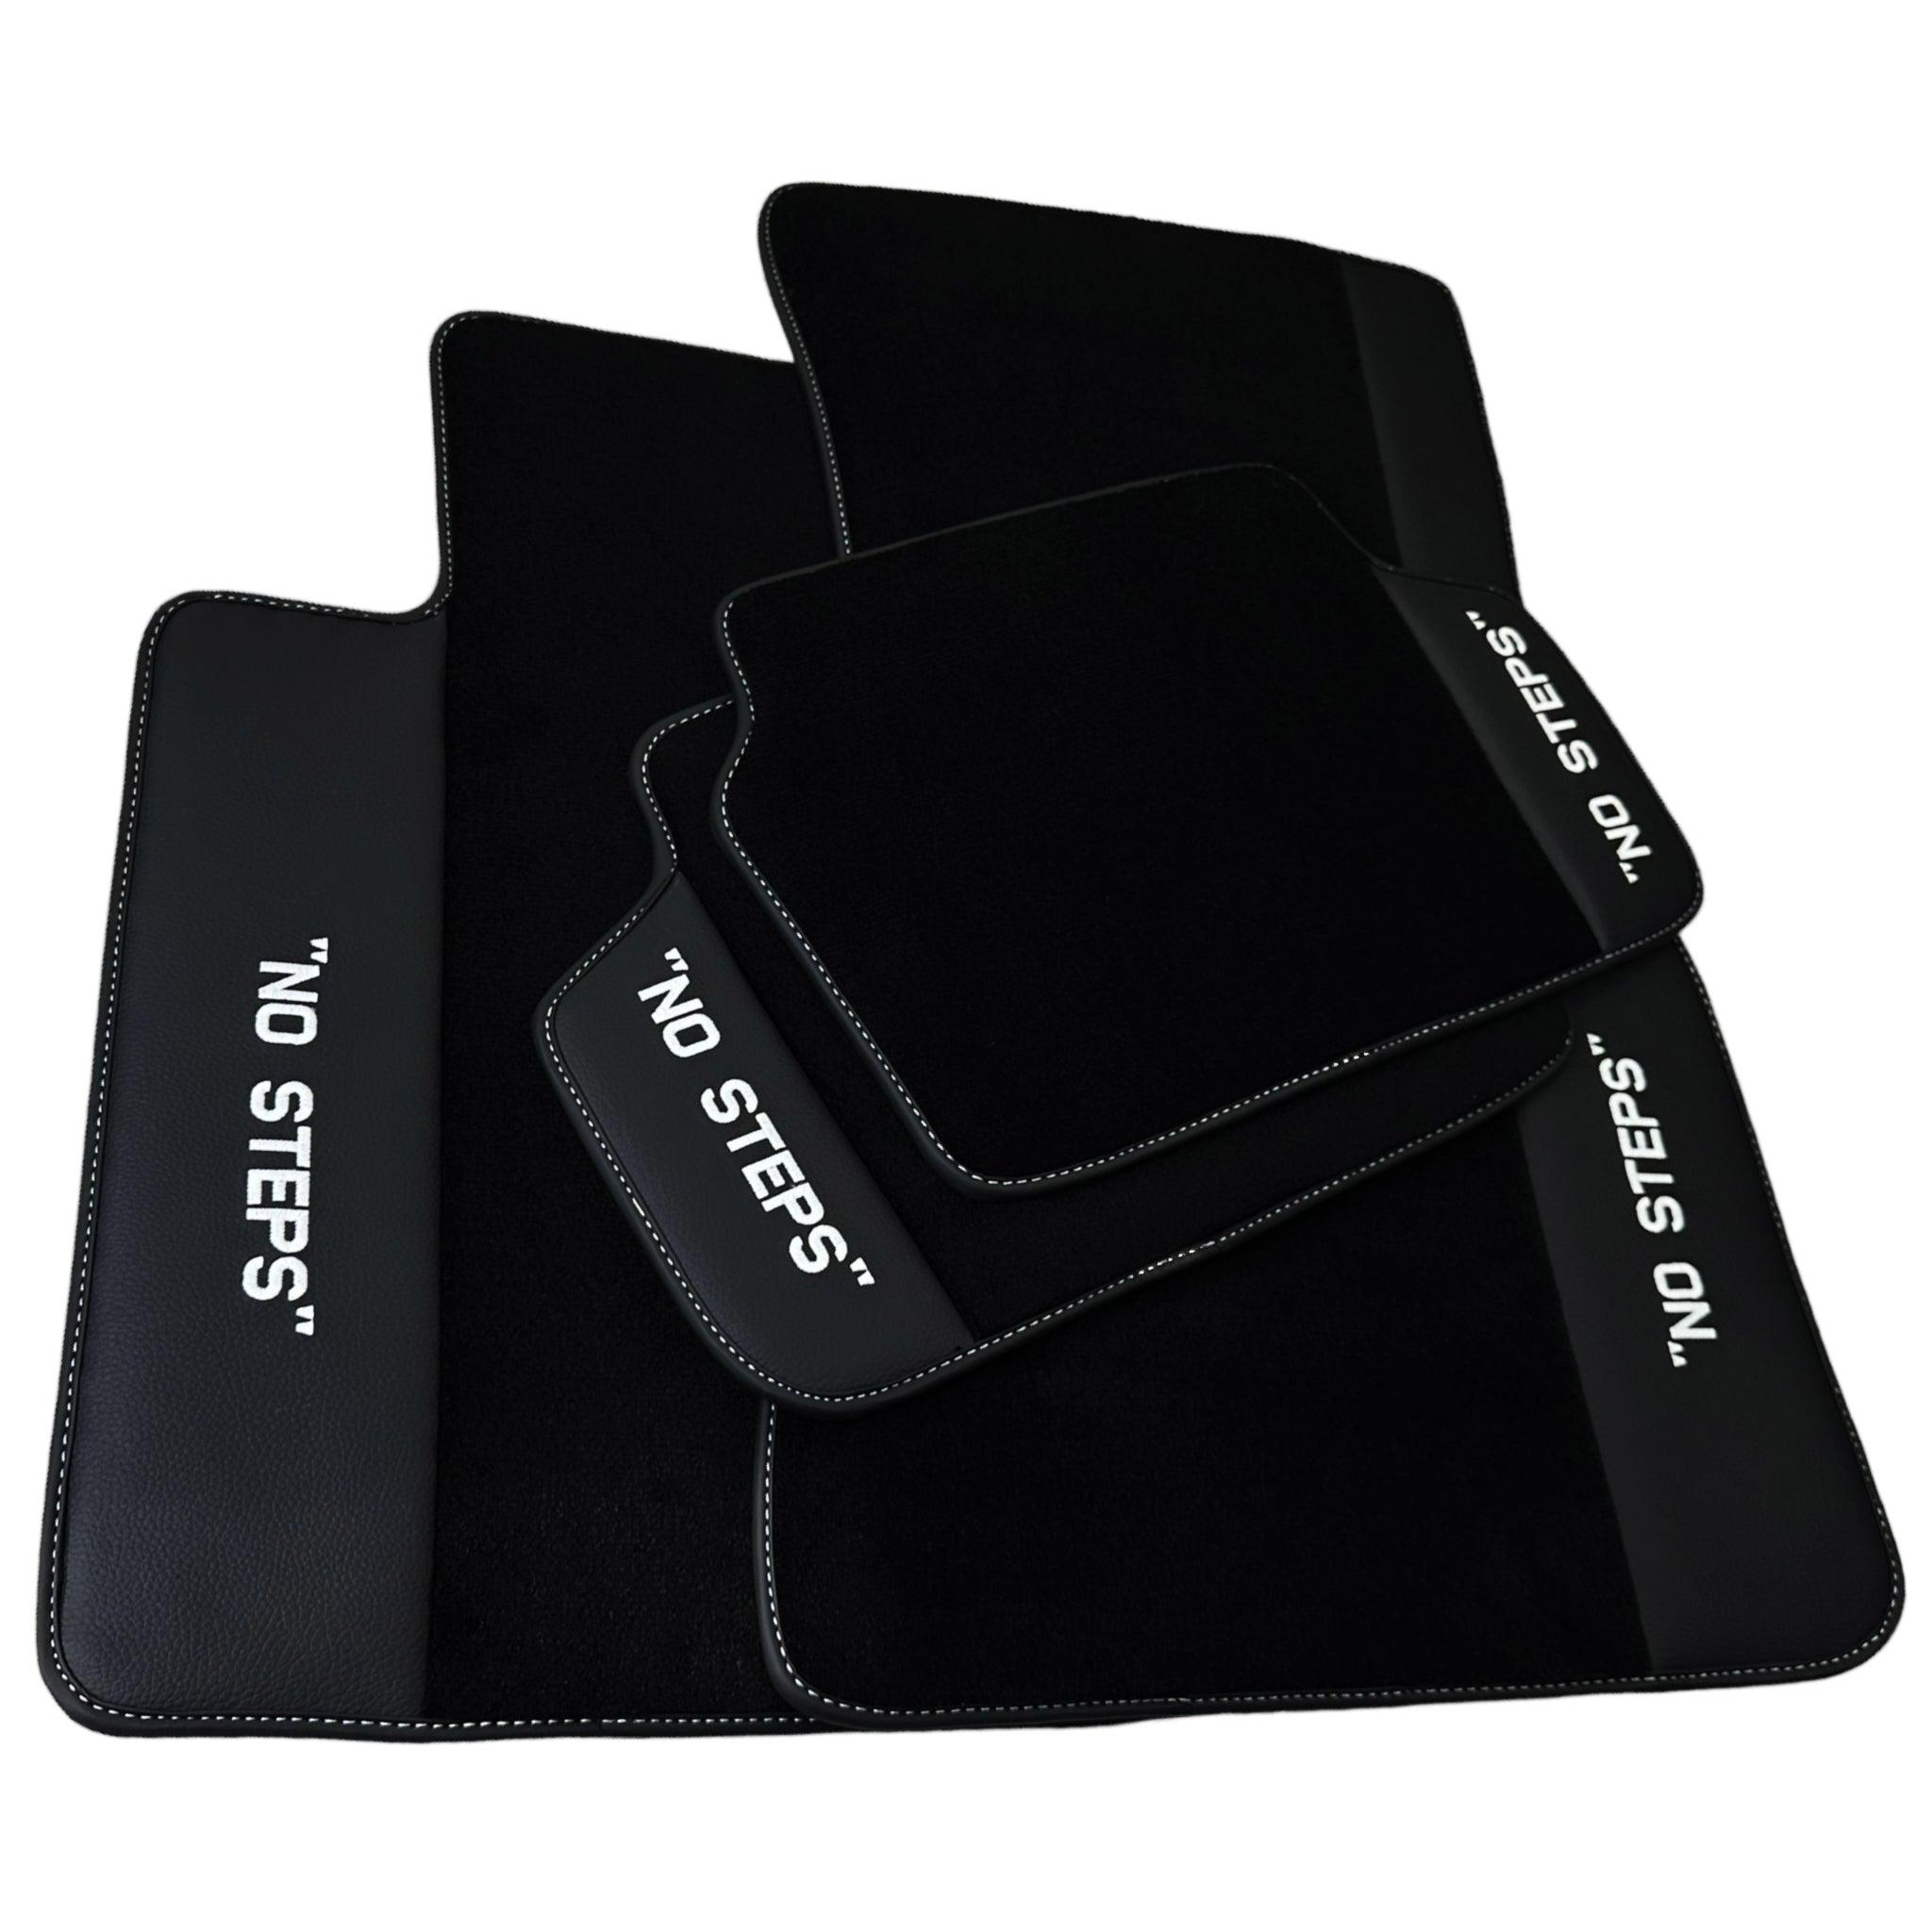 Black Floor Floor Mats For BMW 6 Series F06 Gran Coupe No Steps Edition AutoWin Brand - AutoWin